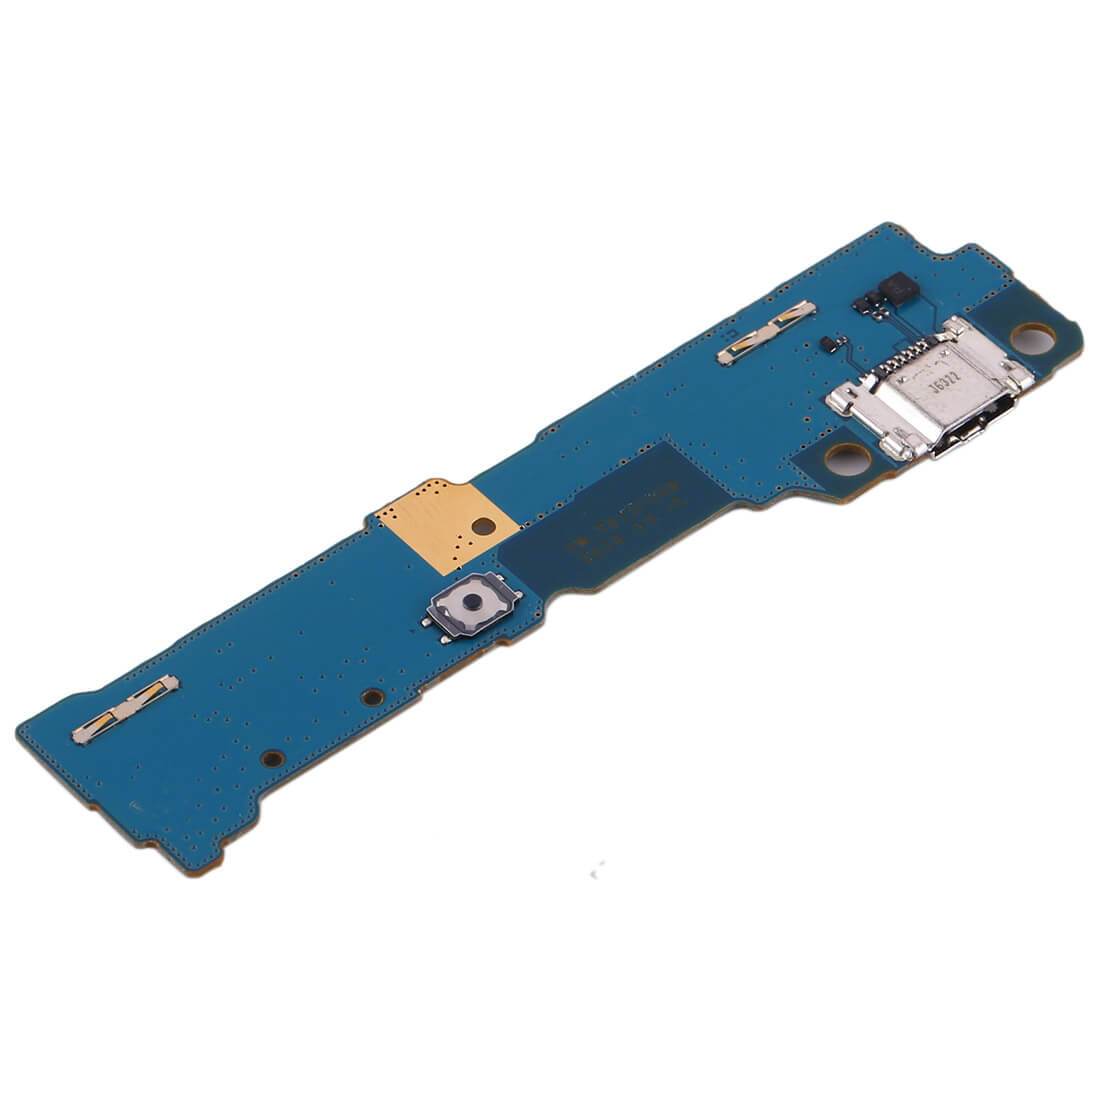 Replacement Charging Port Board For Samsung Galaxy Tab S2 9.7 - T810 / T815